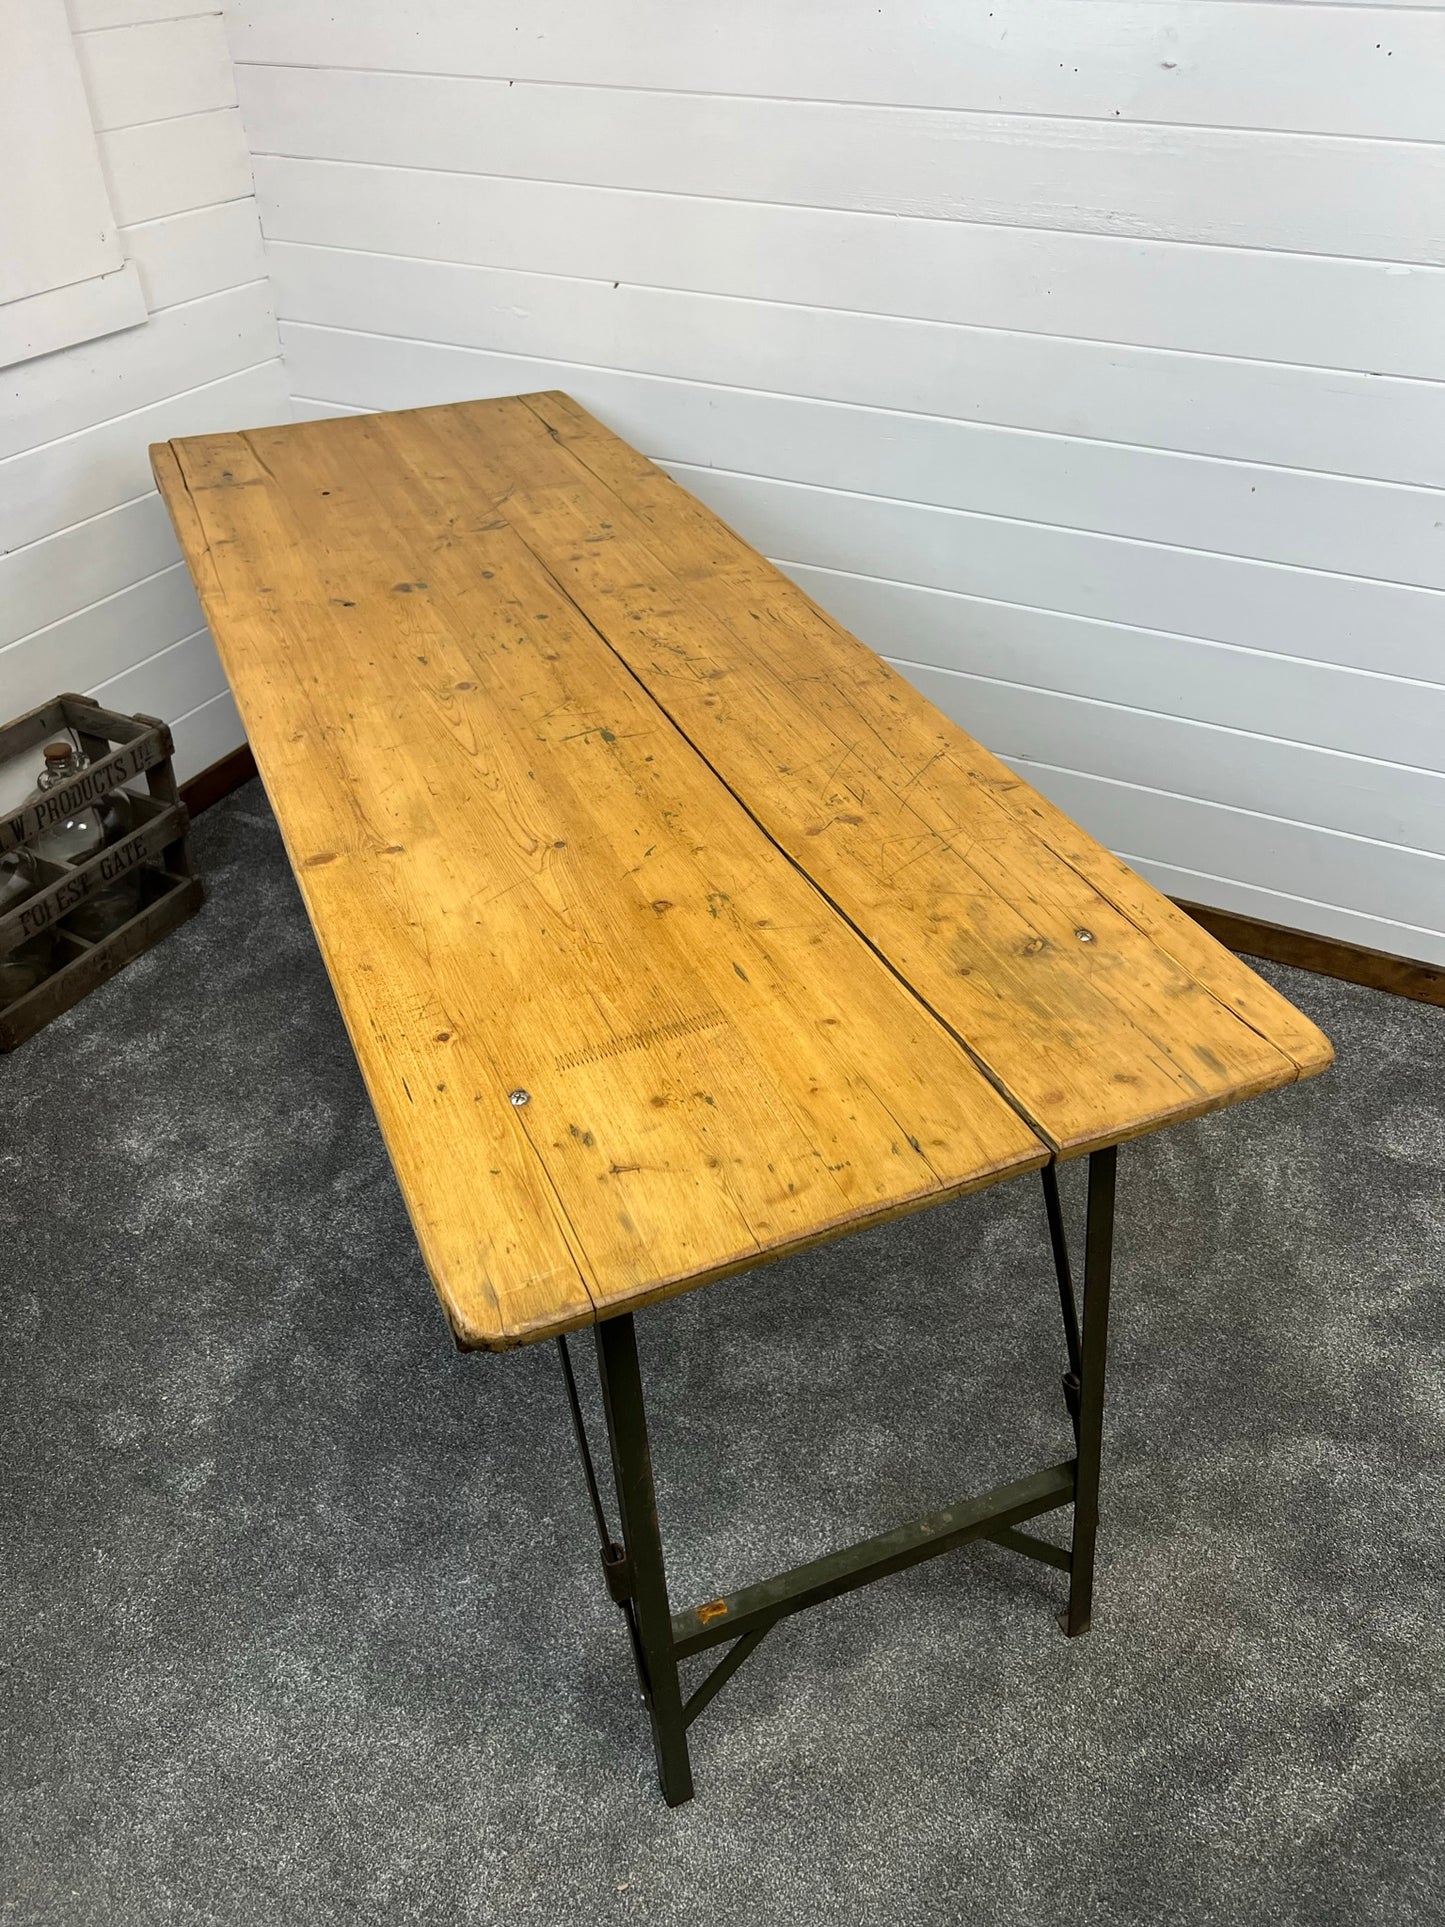 Vintage Industrial Wooden Trestle Table Rustic Folding Farmhouse Dining Boho Event